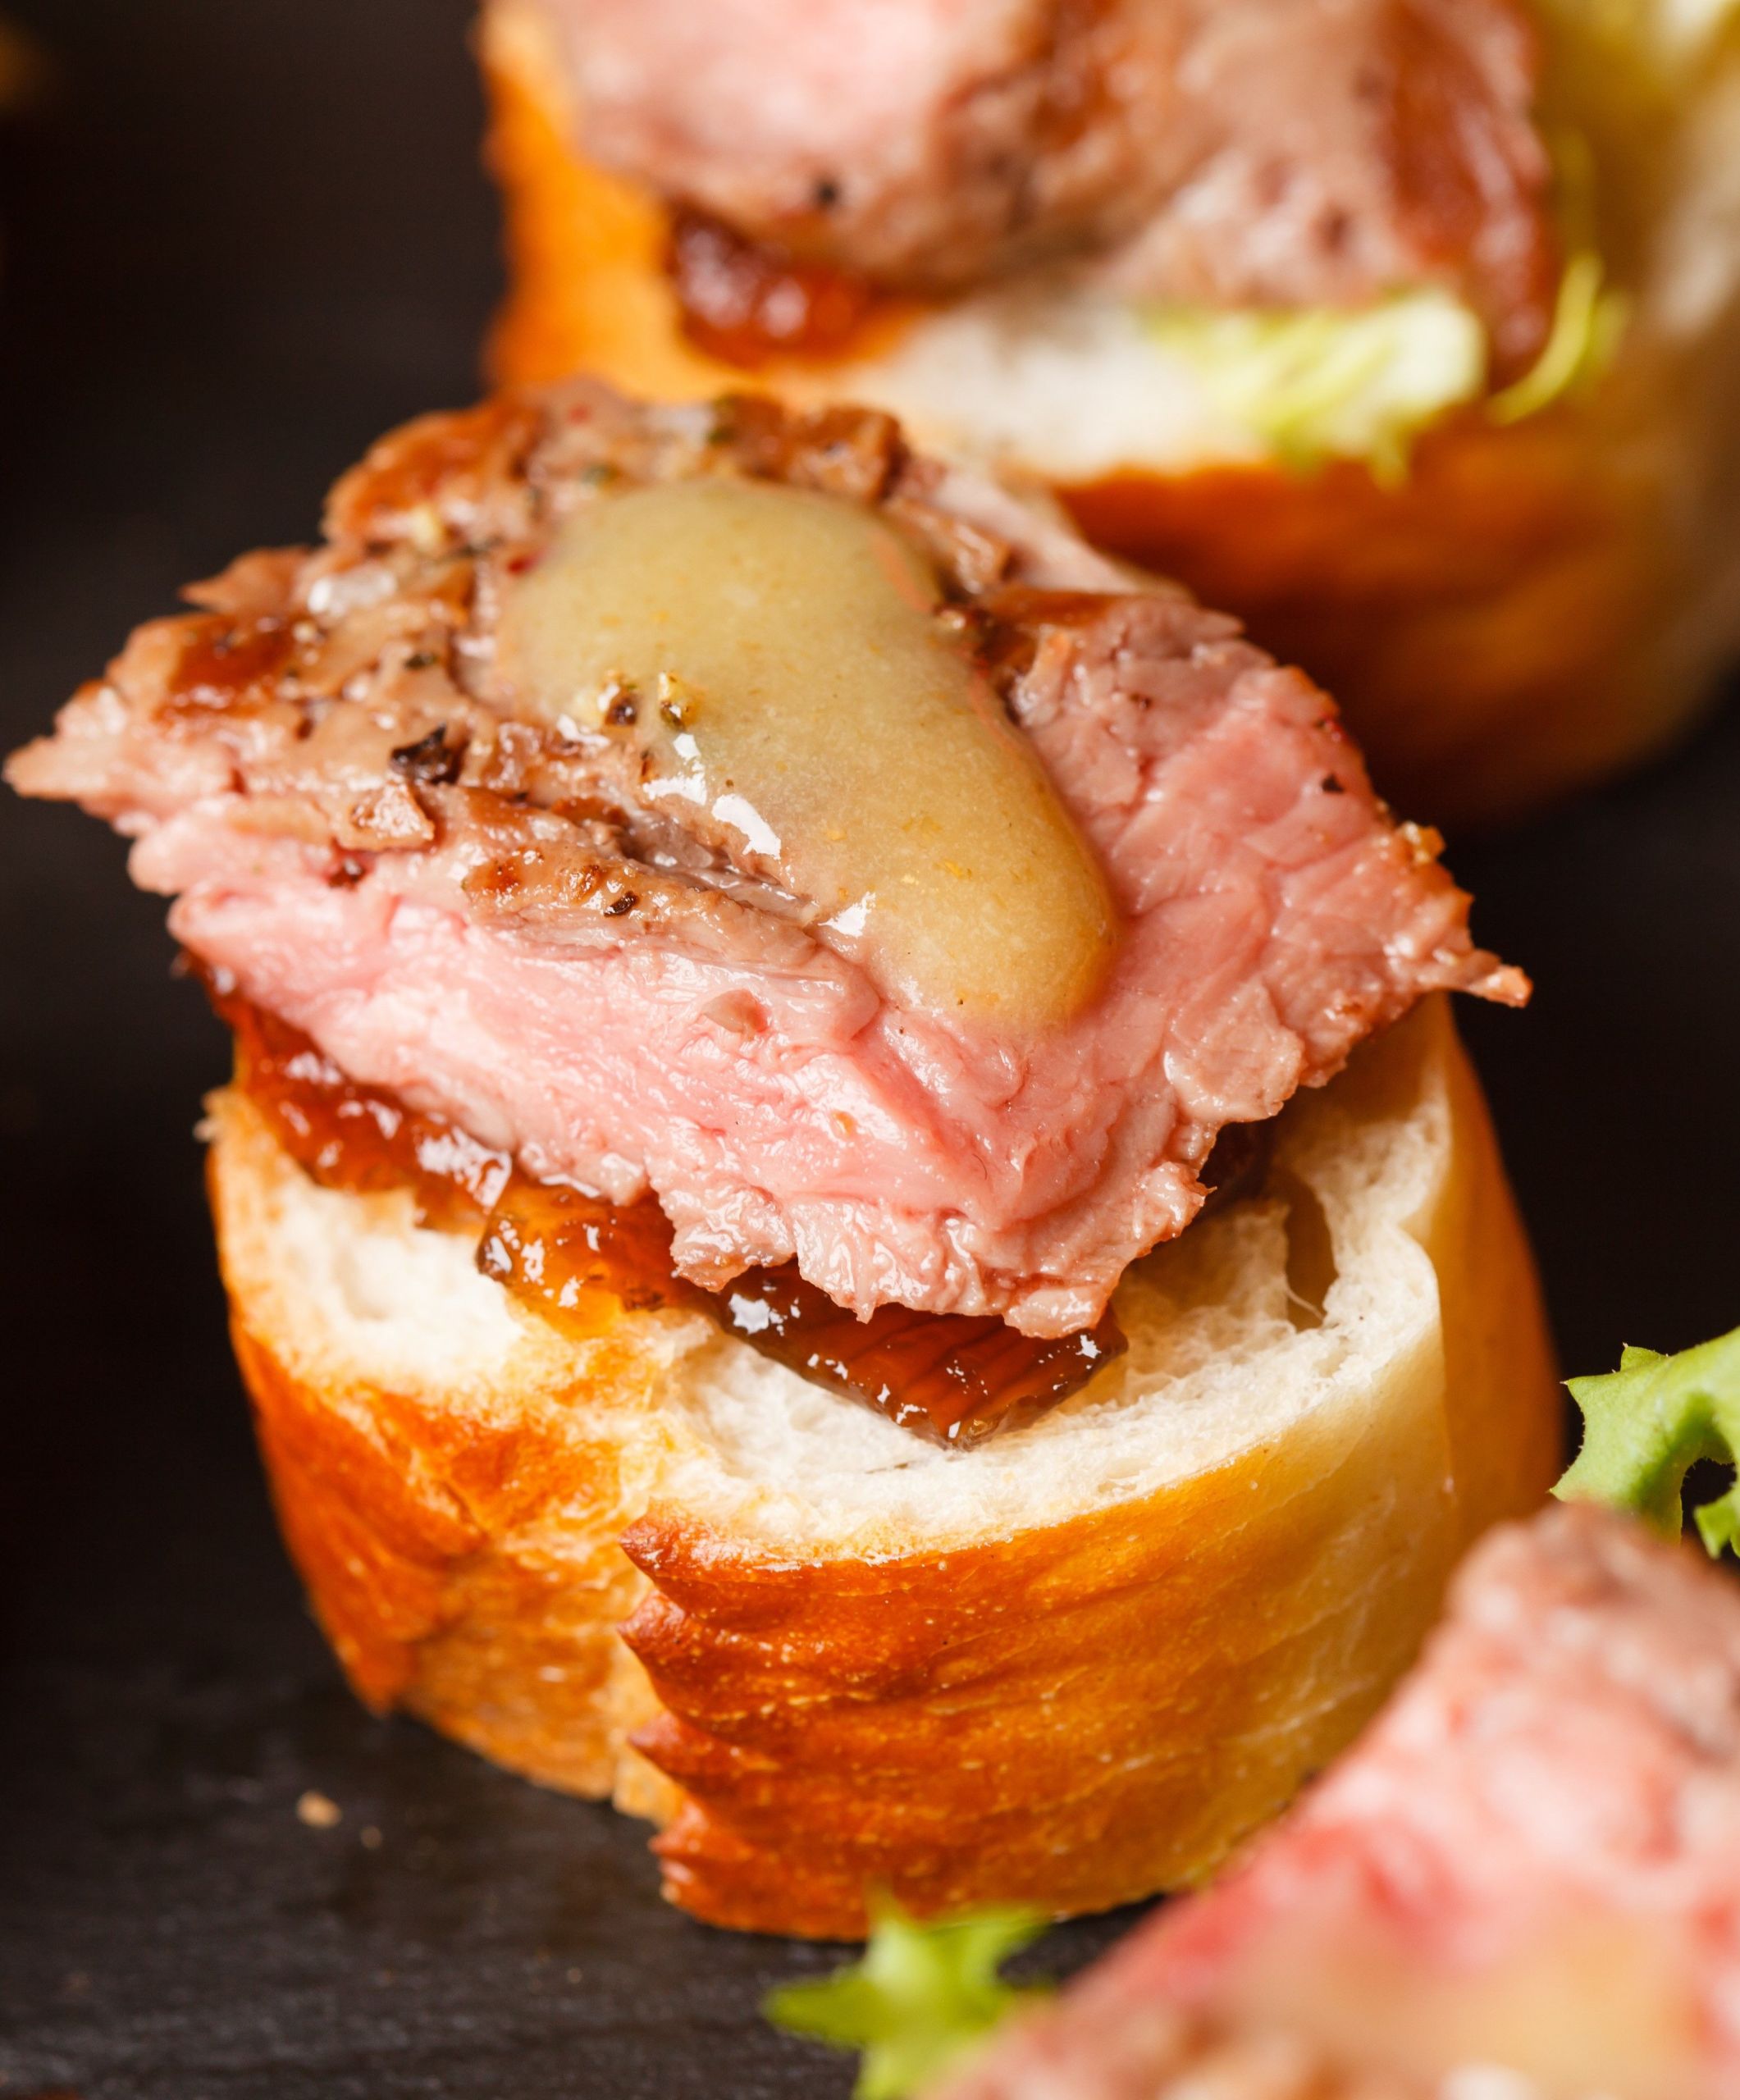 Prime Rib Appetizers
 Super Bowl appetizers are more flavorful with caramelized